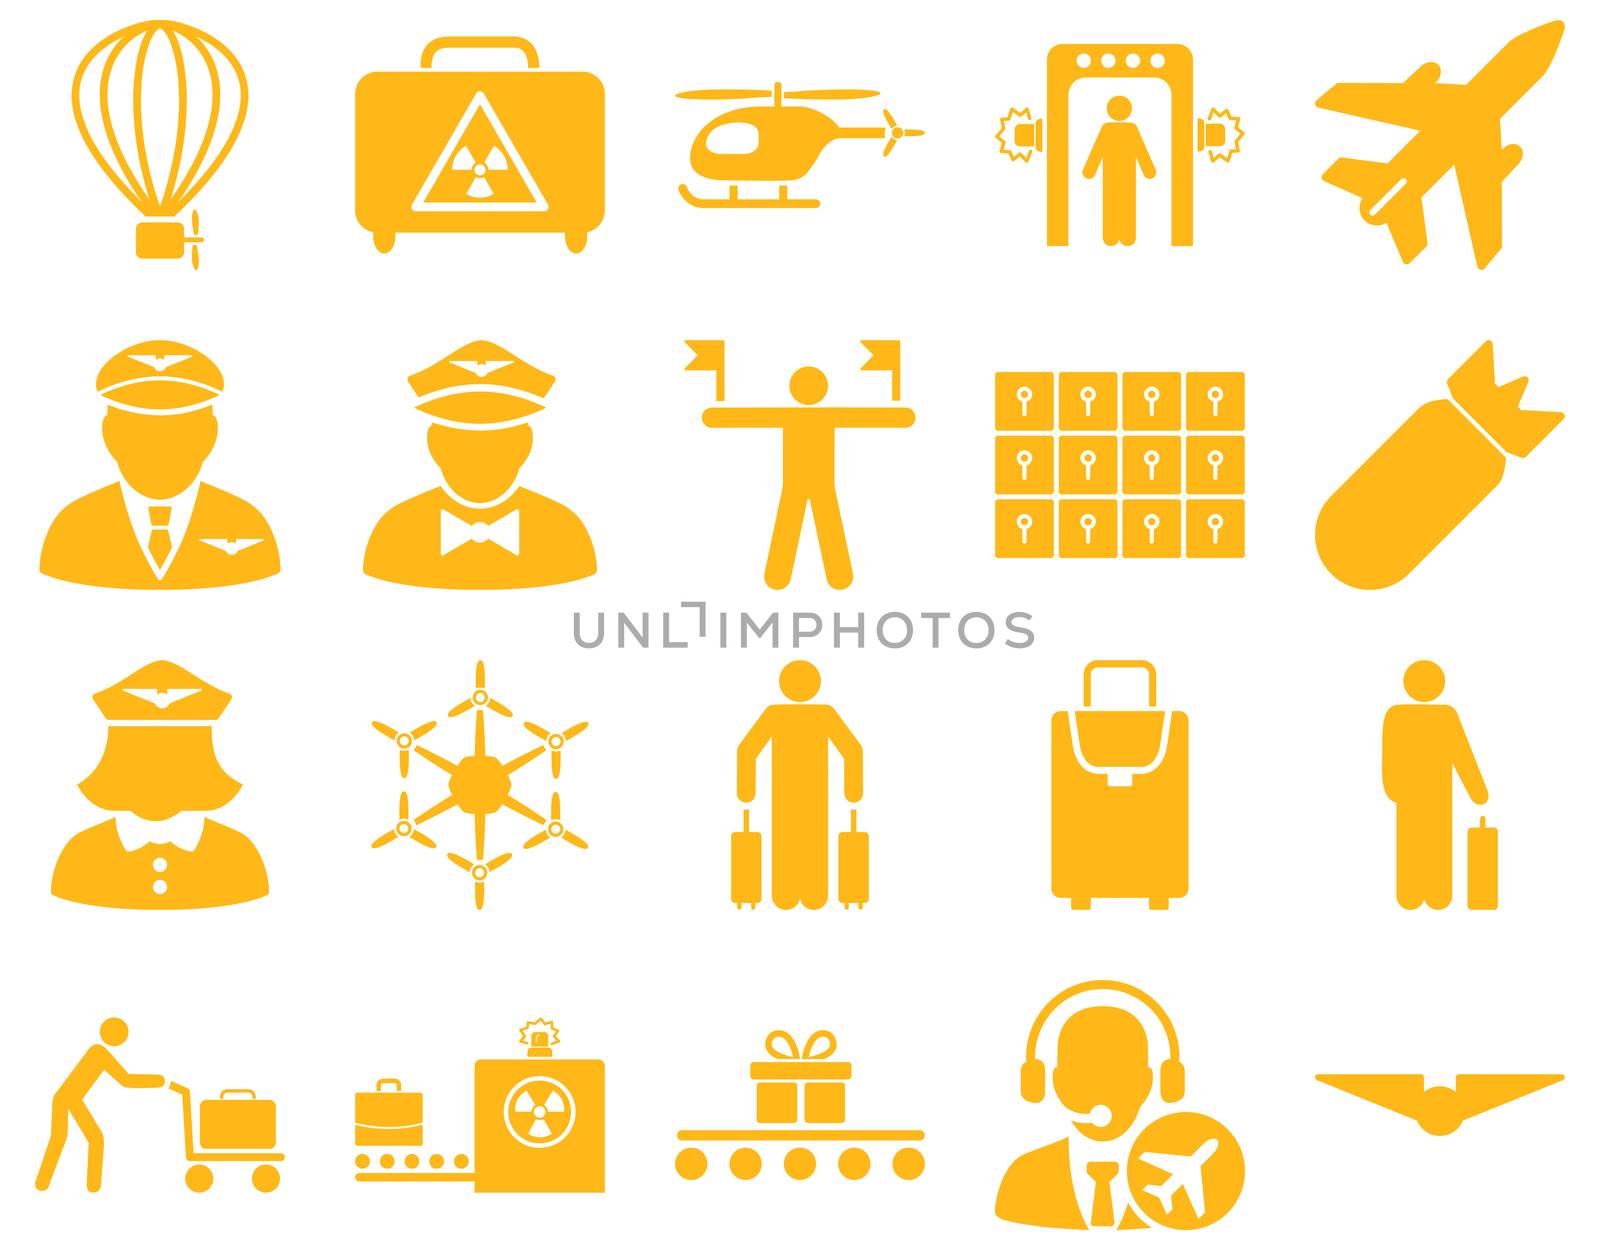 Airport Icon Set. These flat icons use yellow color. Raster images are isolated on a white background.